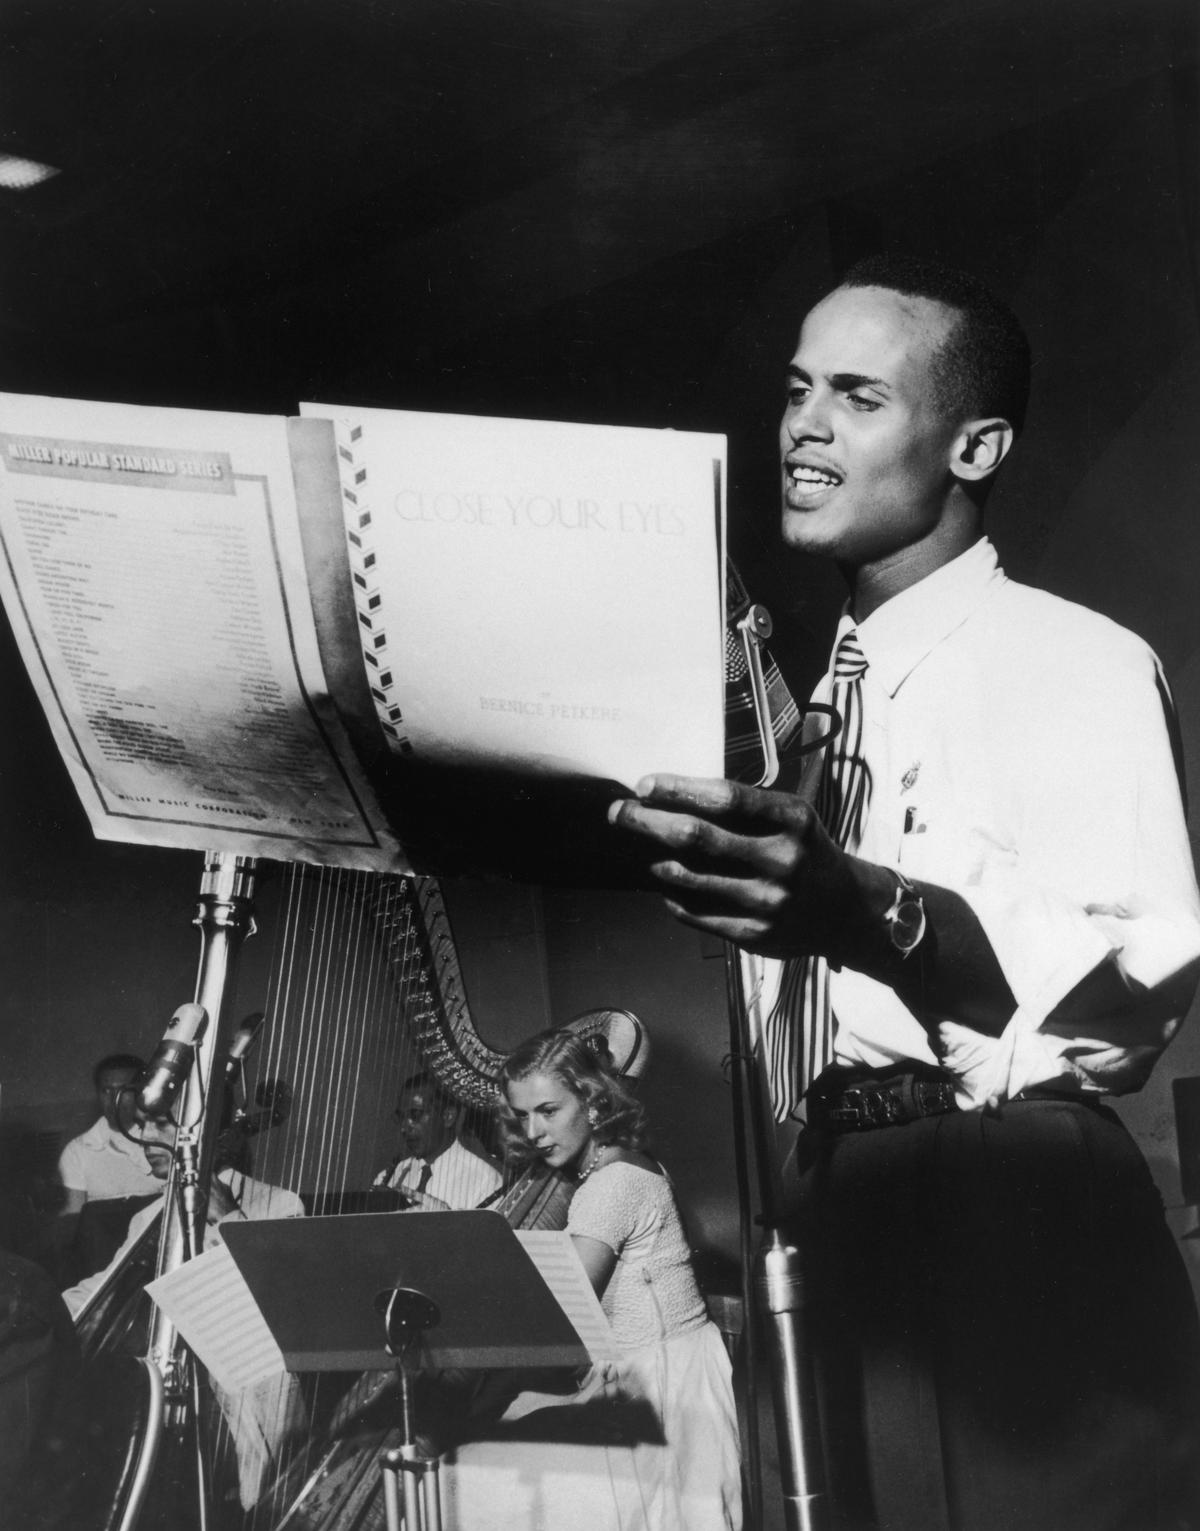 Harry Belafonte singing 'Close Your Eyes' by Bernice Petchere